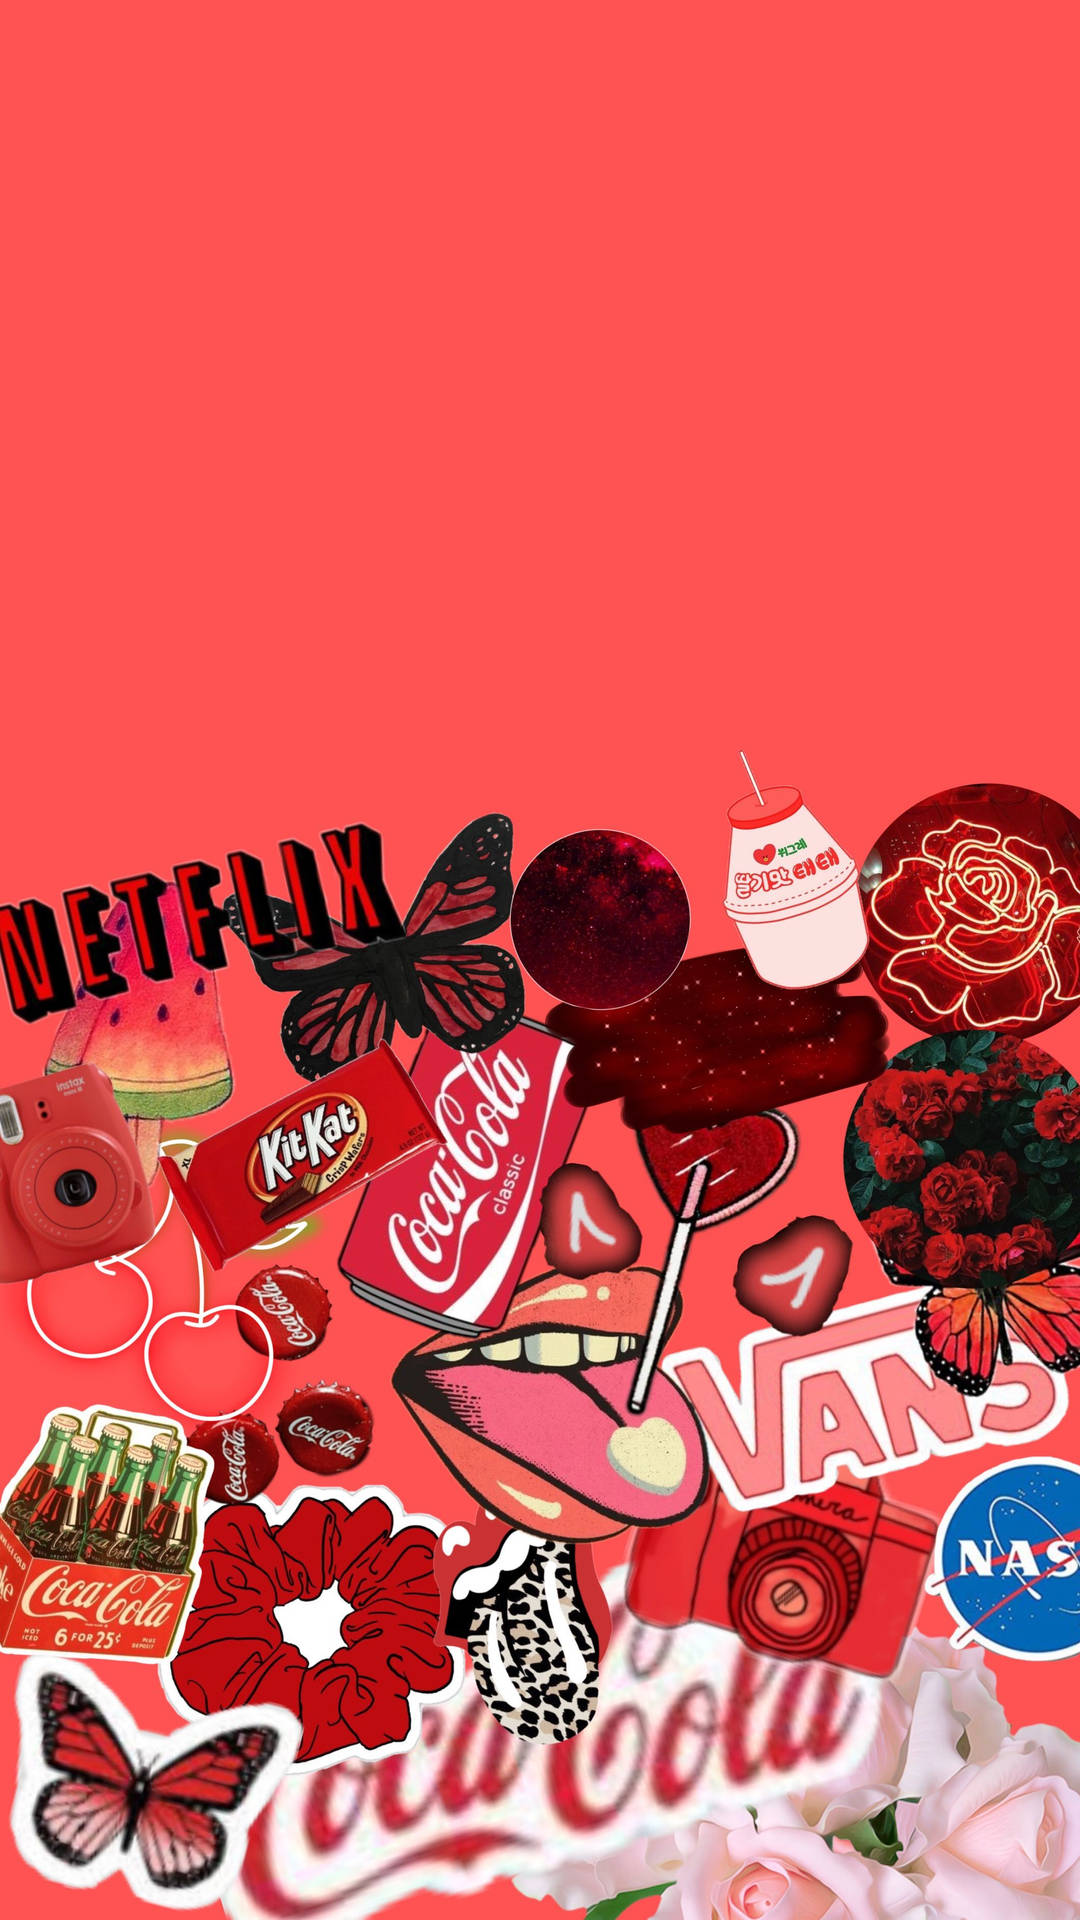 Brand Stickers Pastel Red Aesthetic Wallpaper